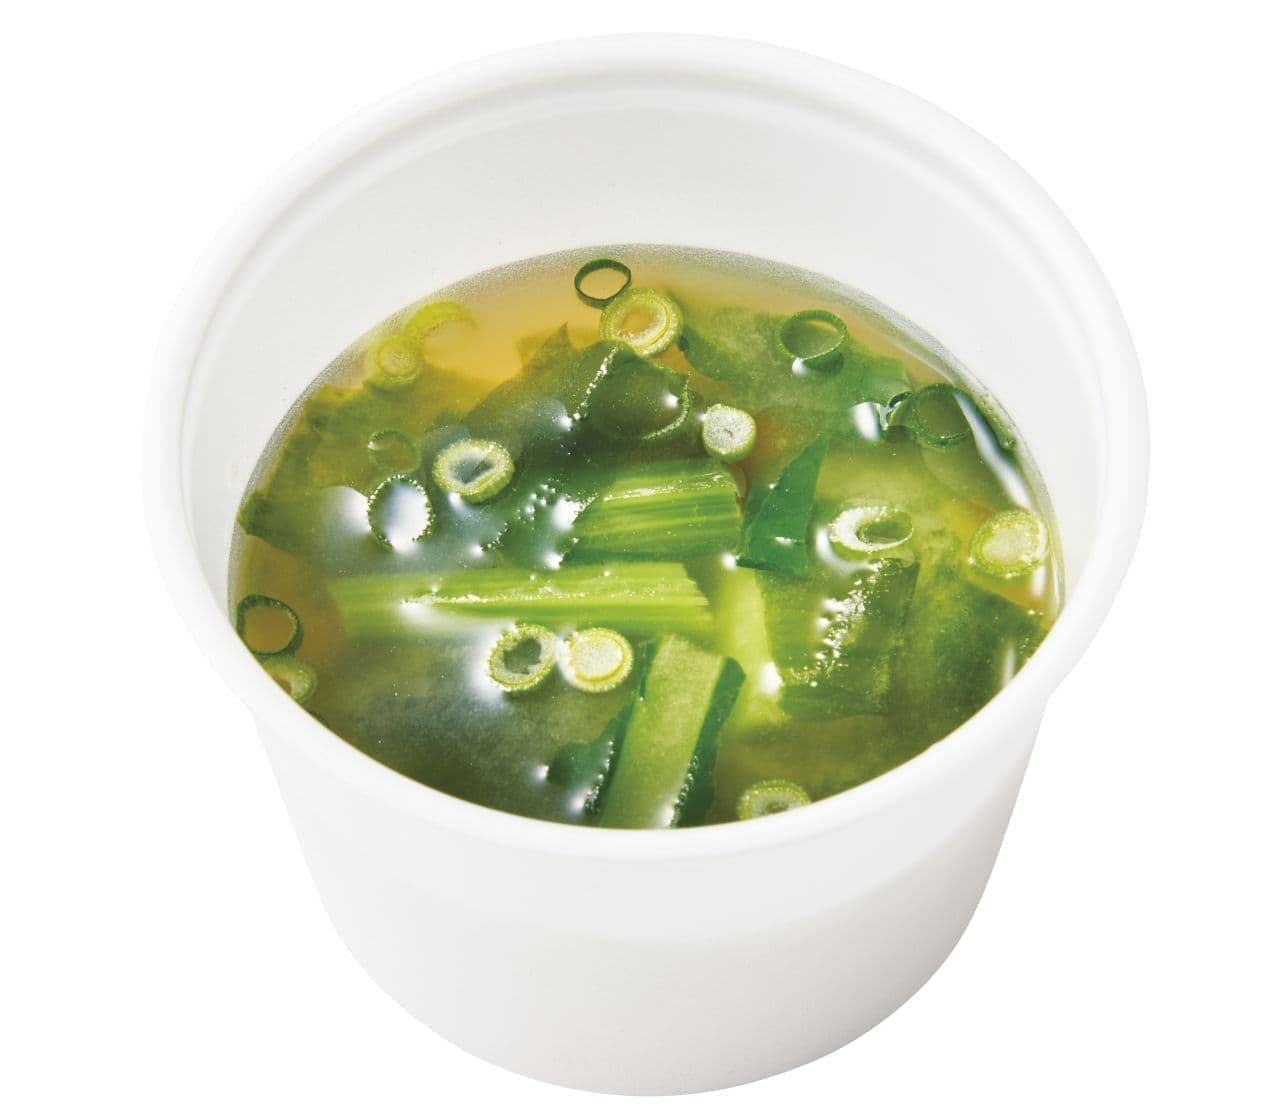 Hotto Motto Grill "Miso soup with lots of ingredients: wakame seaweed and komatsuna